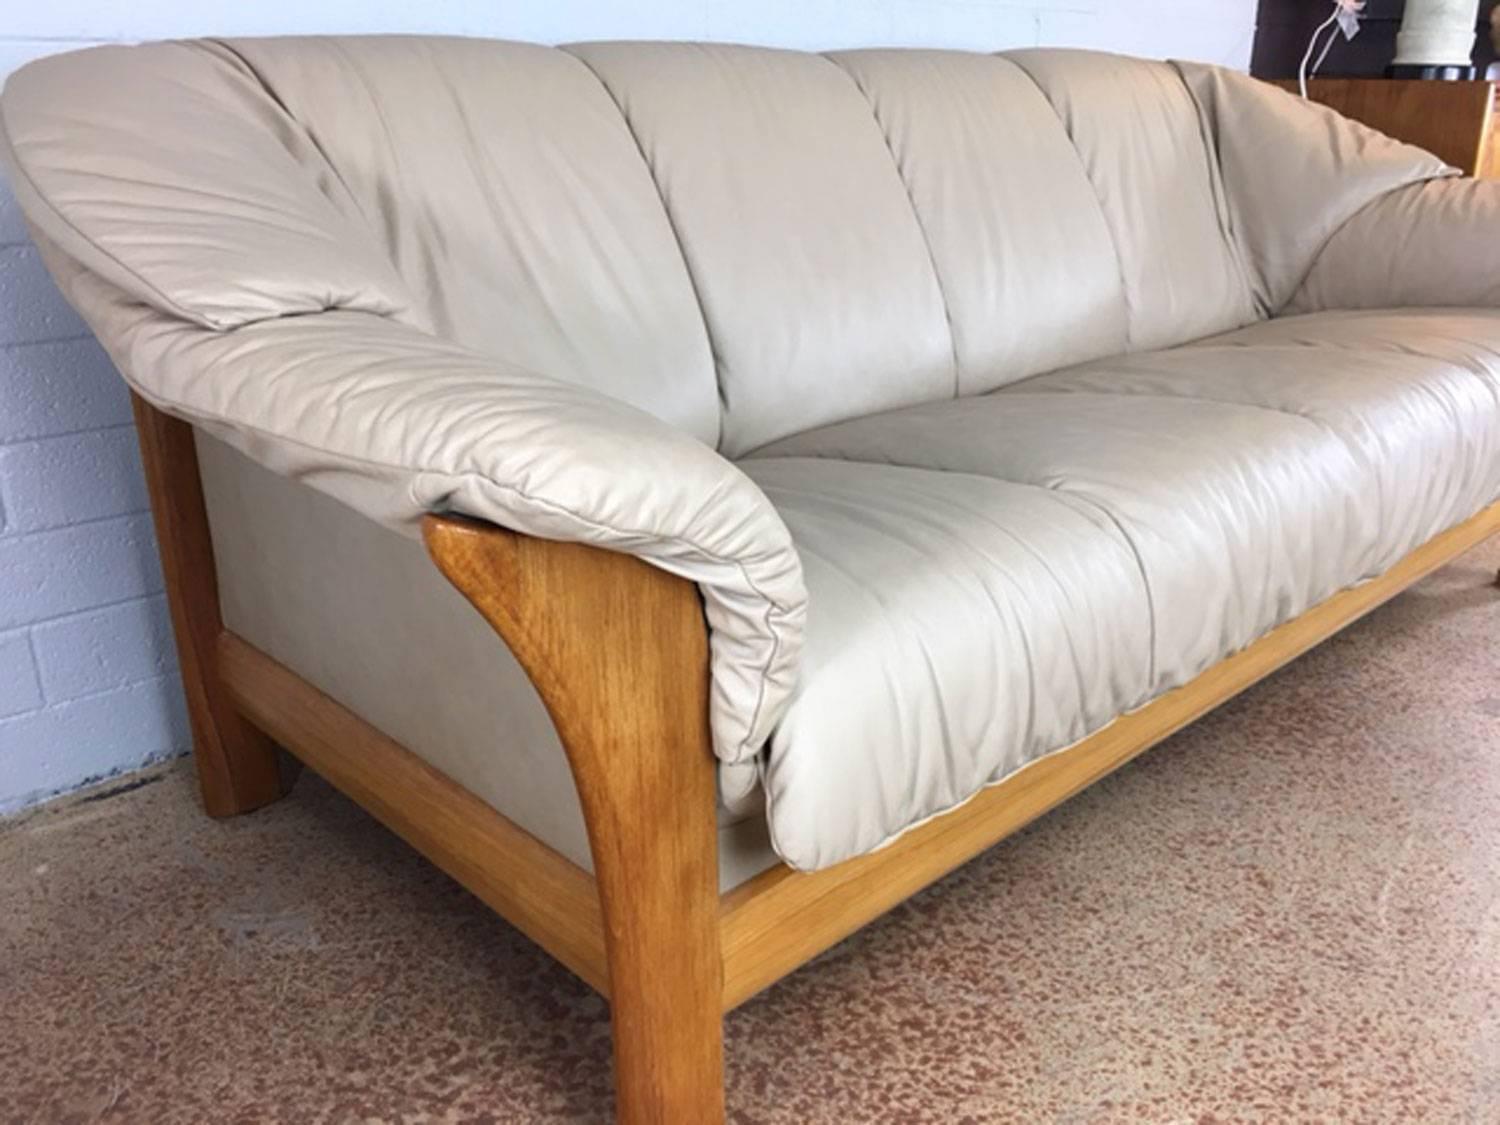 Superb, well built Ekornes leather sofa with wraparound teak frame. Soft. Supple. Very good condition. Circa 1970s. Seat height is 17.5".